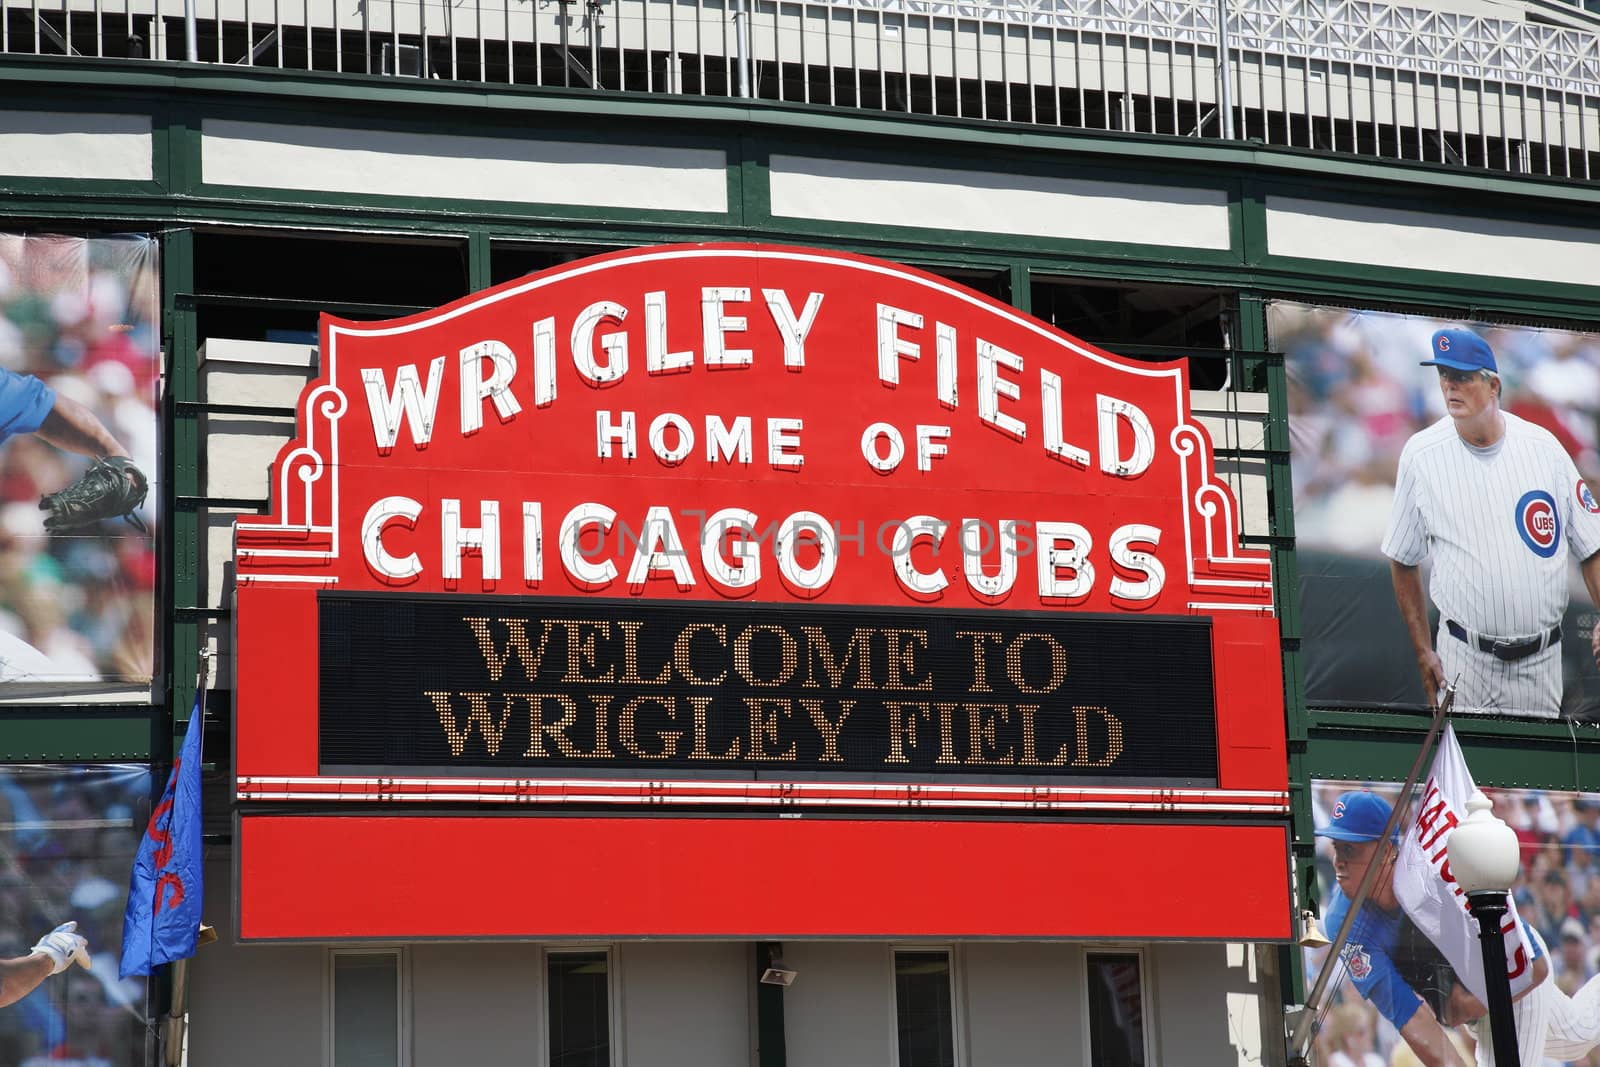 Historic ballpark and famous welcome sign of the Chicago Cubs